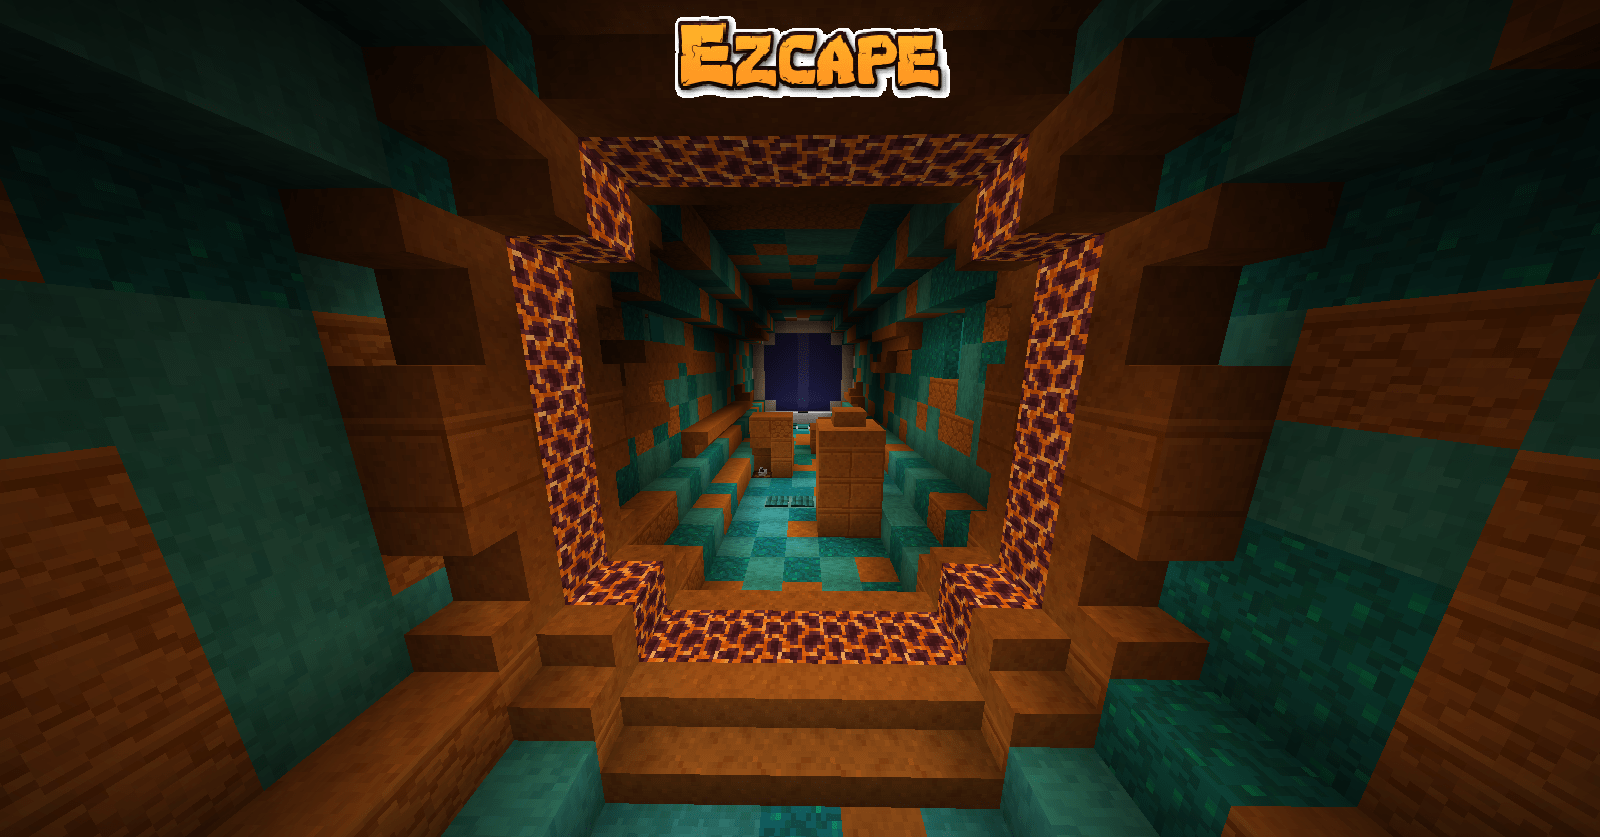 Download Ezcape - First Mission 1.0 for Minecraft 1.16.4